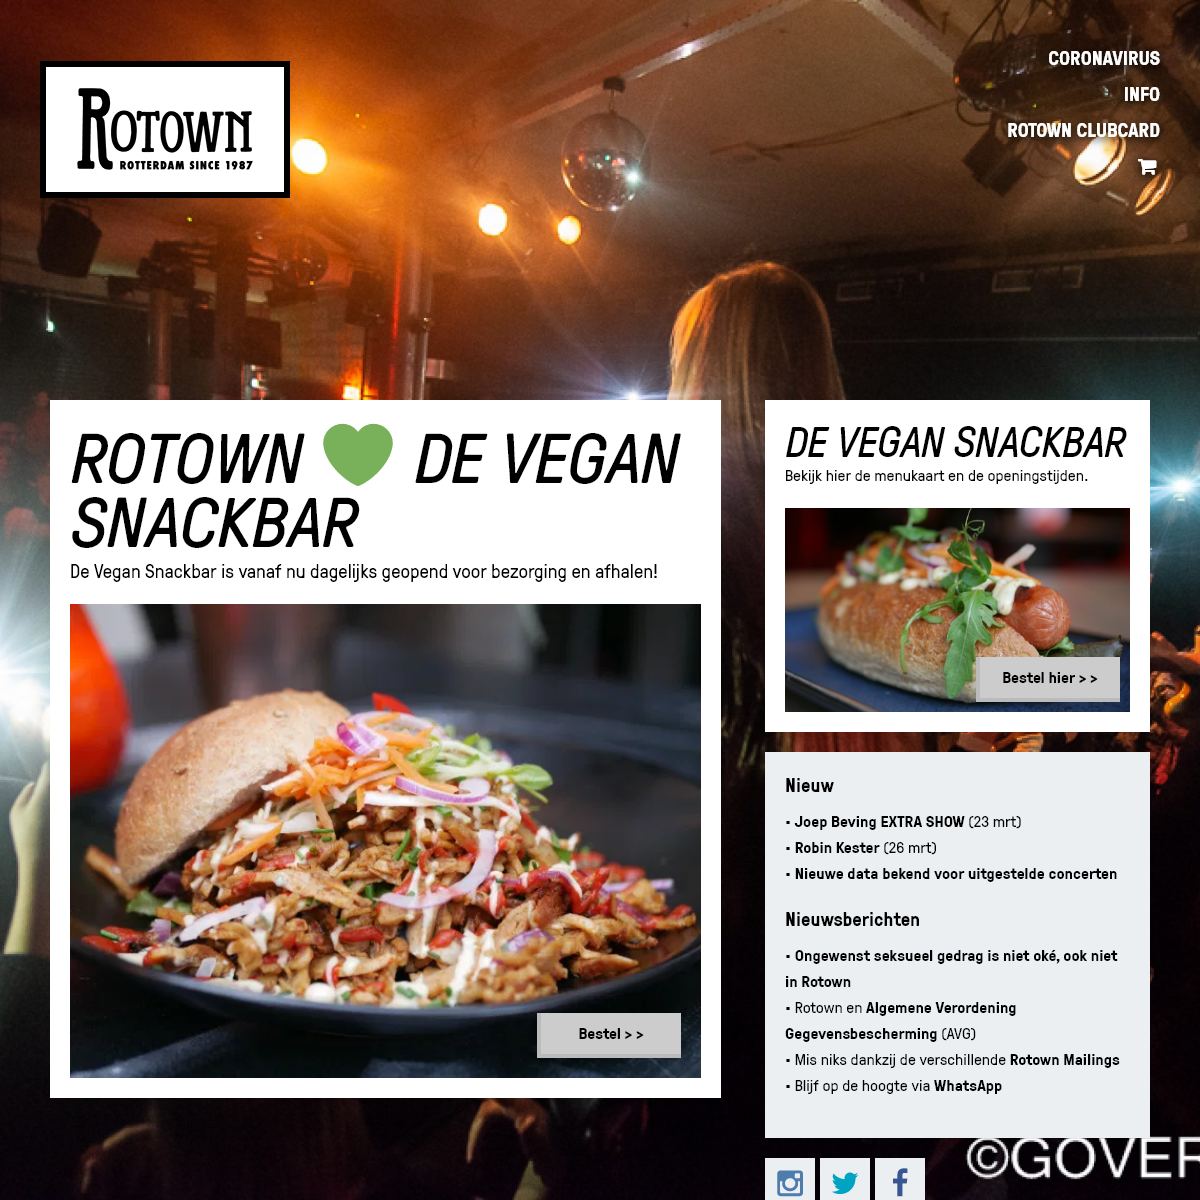 A complete backup of rotown.nl